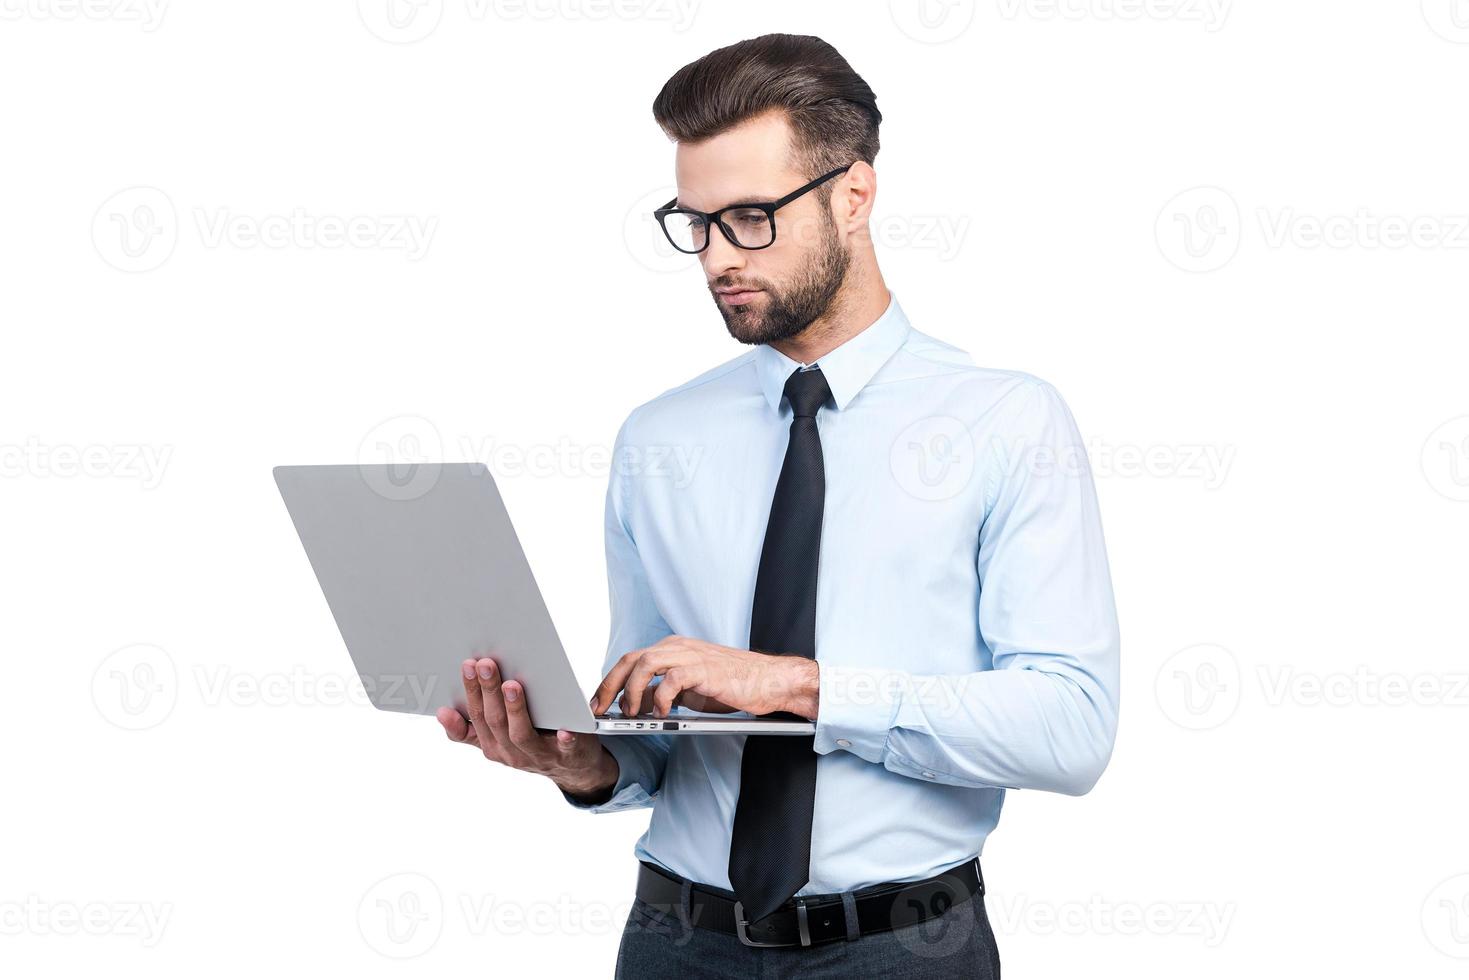 Concentrated on work. Confident young handsome man in shirt and tie working on laptop while standing against white background photo